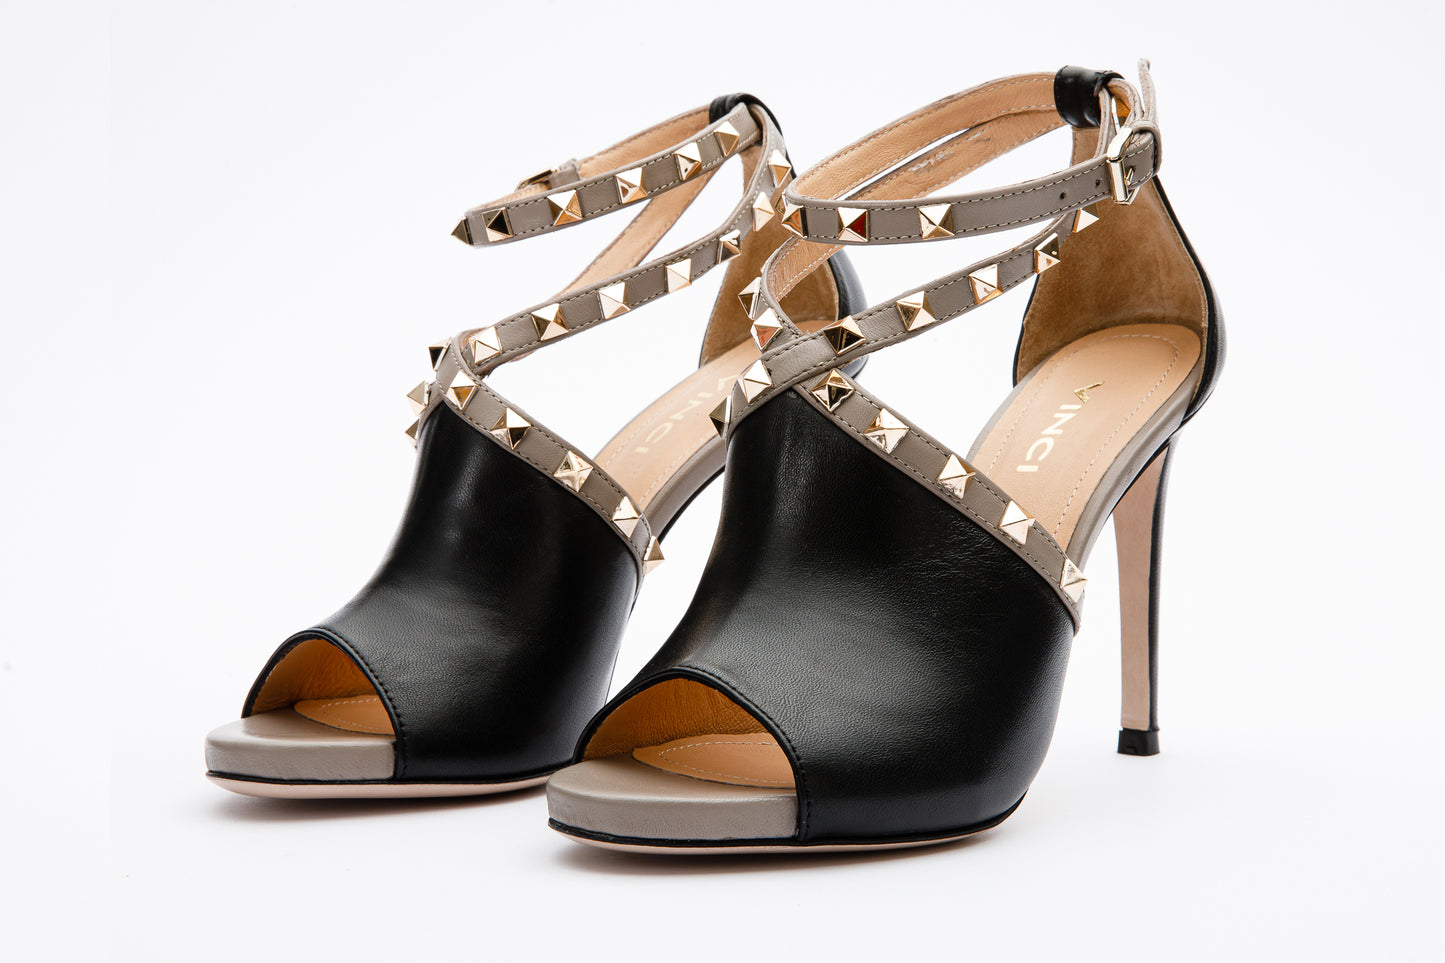 The Ribnica Black Leather Ankle Strap Women Sandal